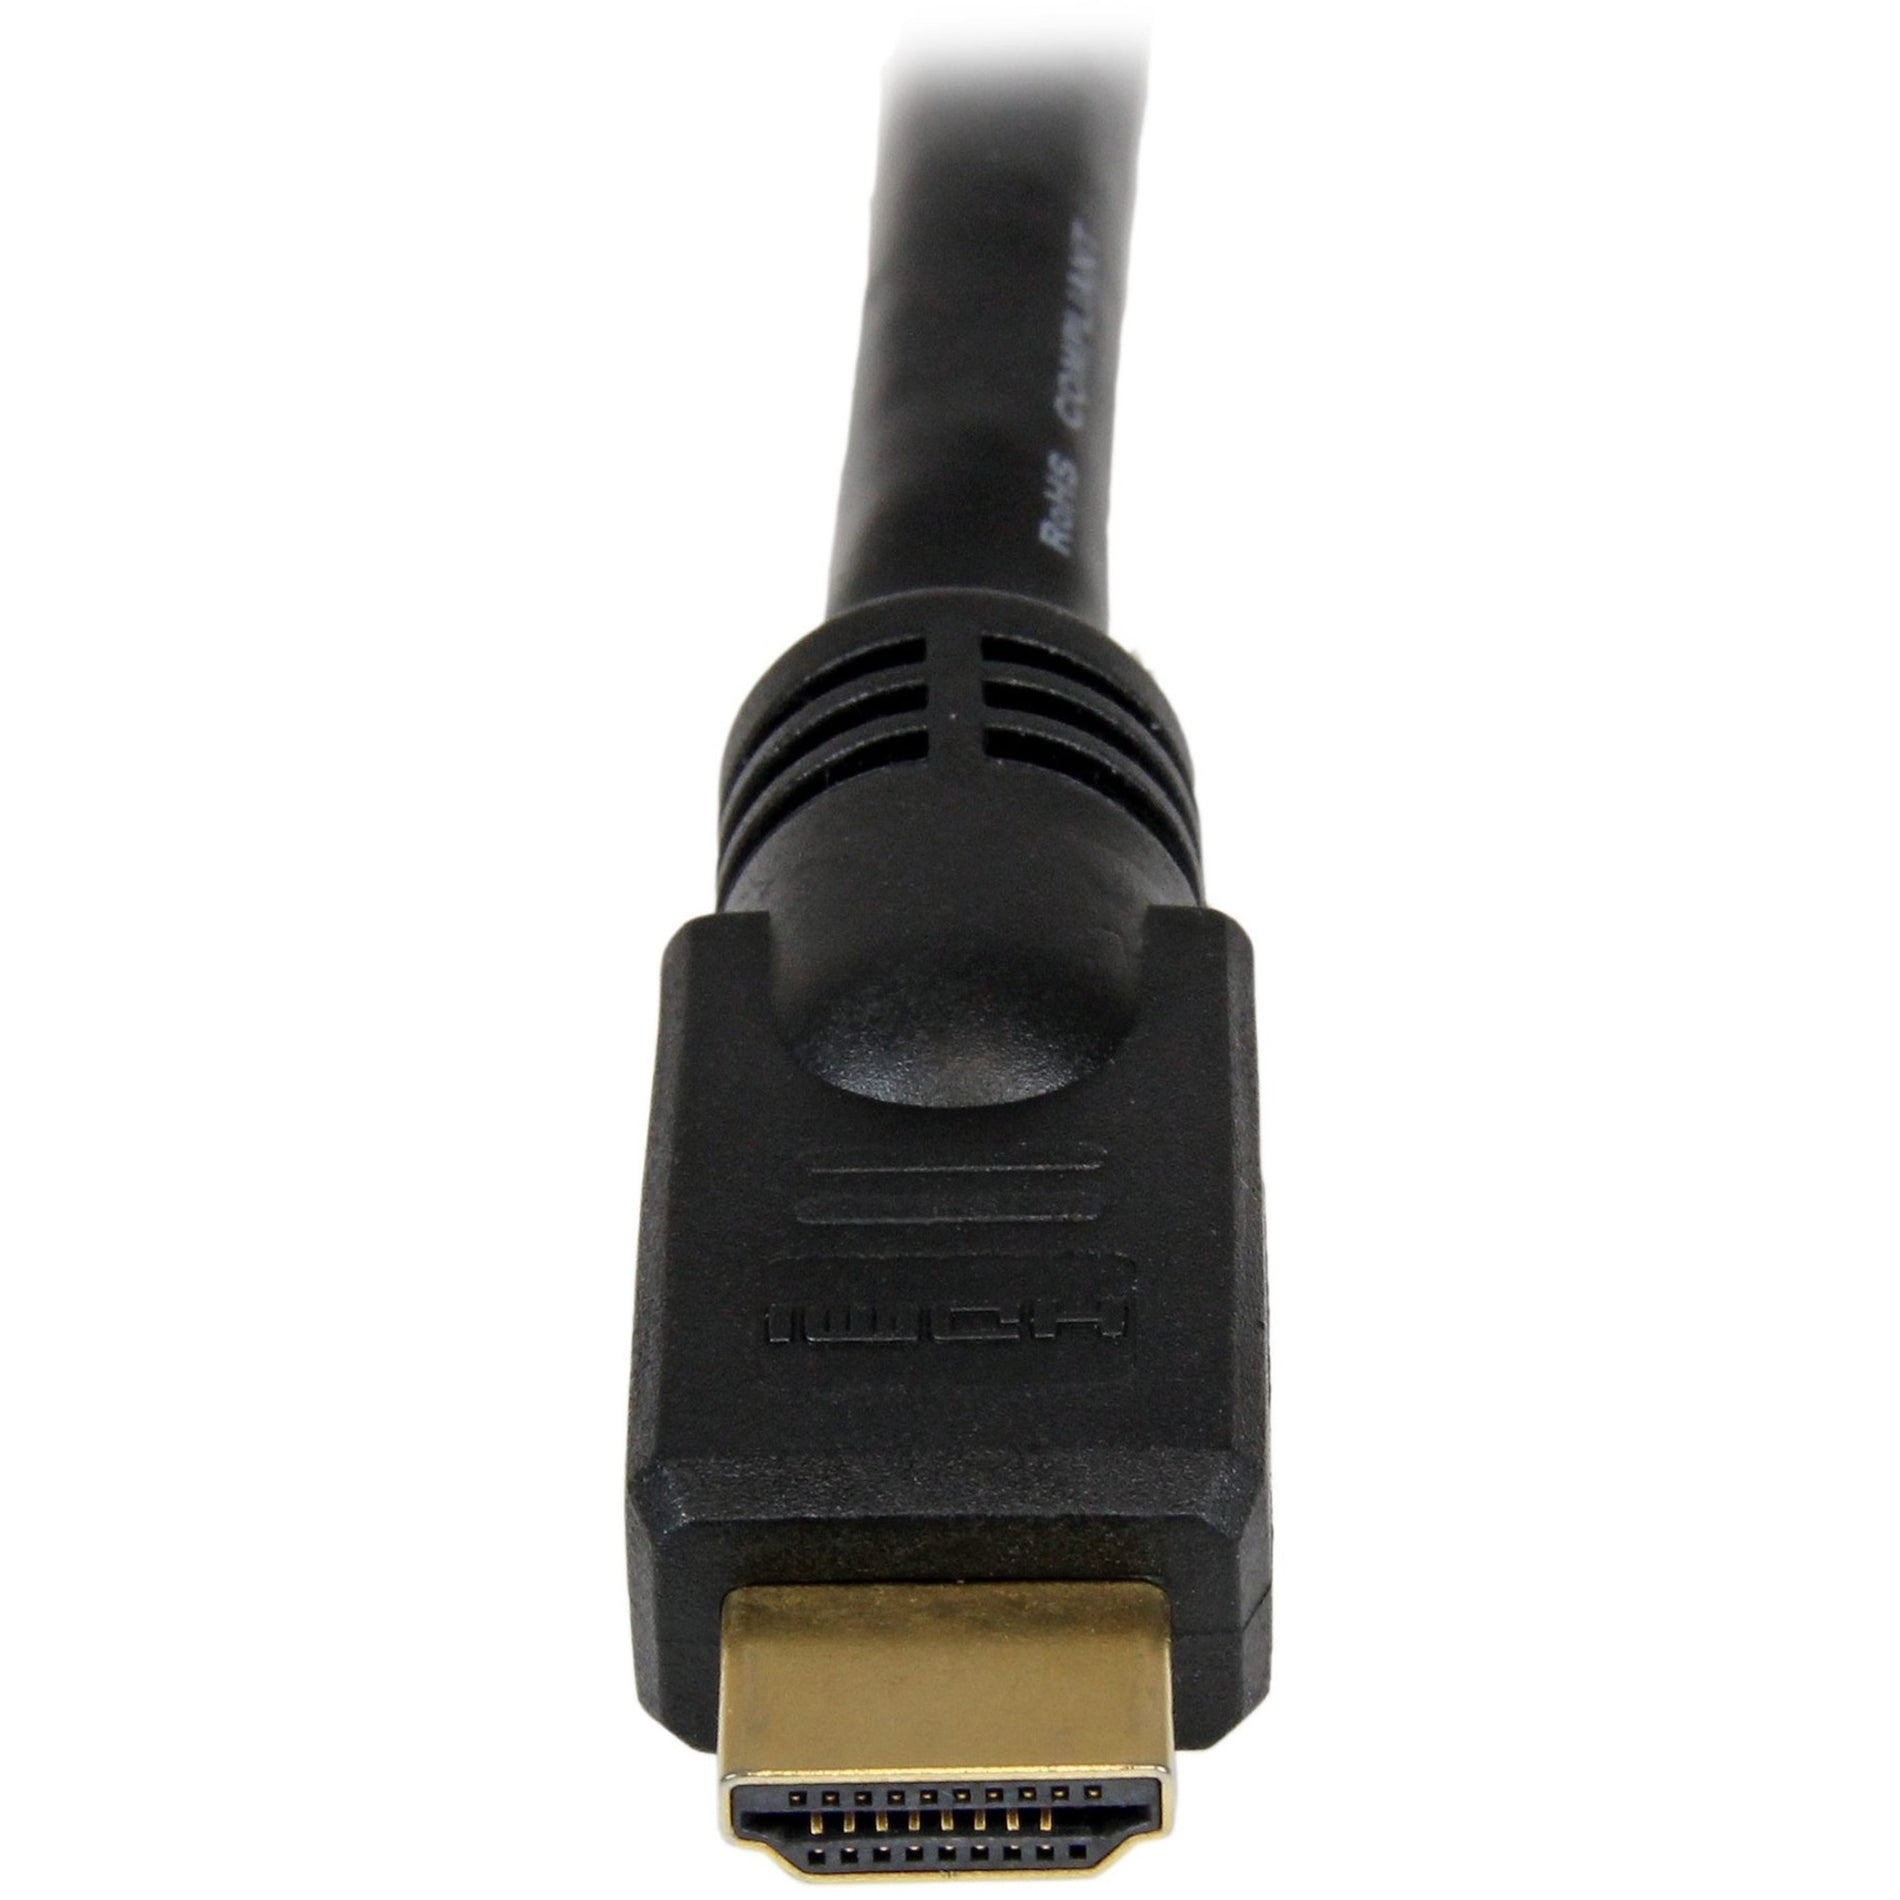 StarTech.com HDMM20 20 ft High Speed HDMI Cable - Ultra HD 4k x 2k HDMI Cable, Molded, Gold Plated Connectors, Black